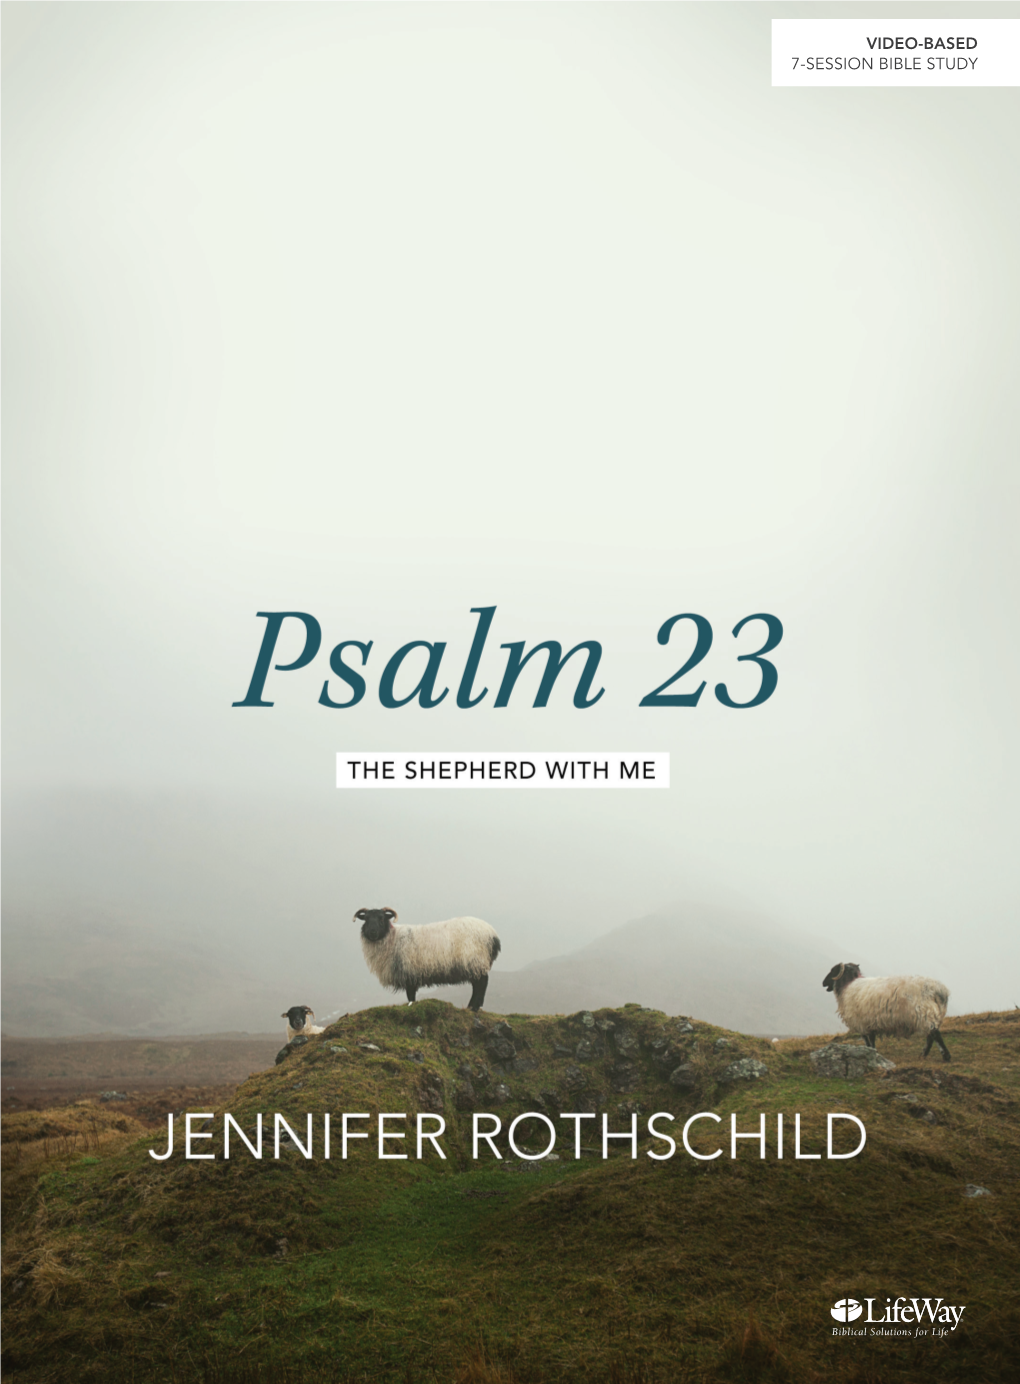 Psalm 23: the Shepherd with Me Is Jennifer’S Sixth Video- Based Bible Study with Lifeway